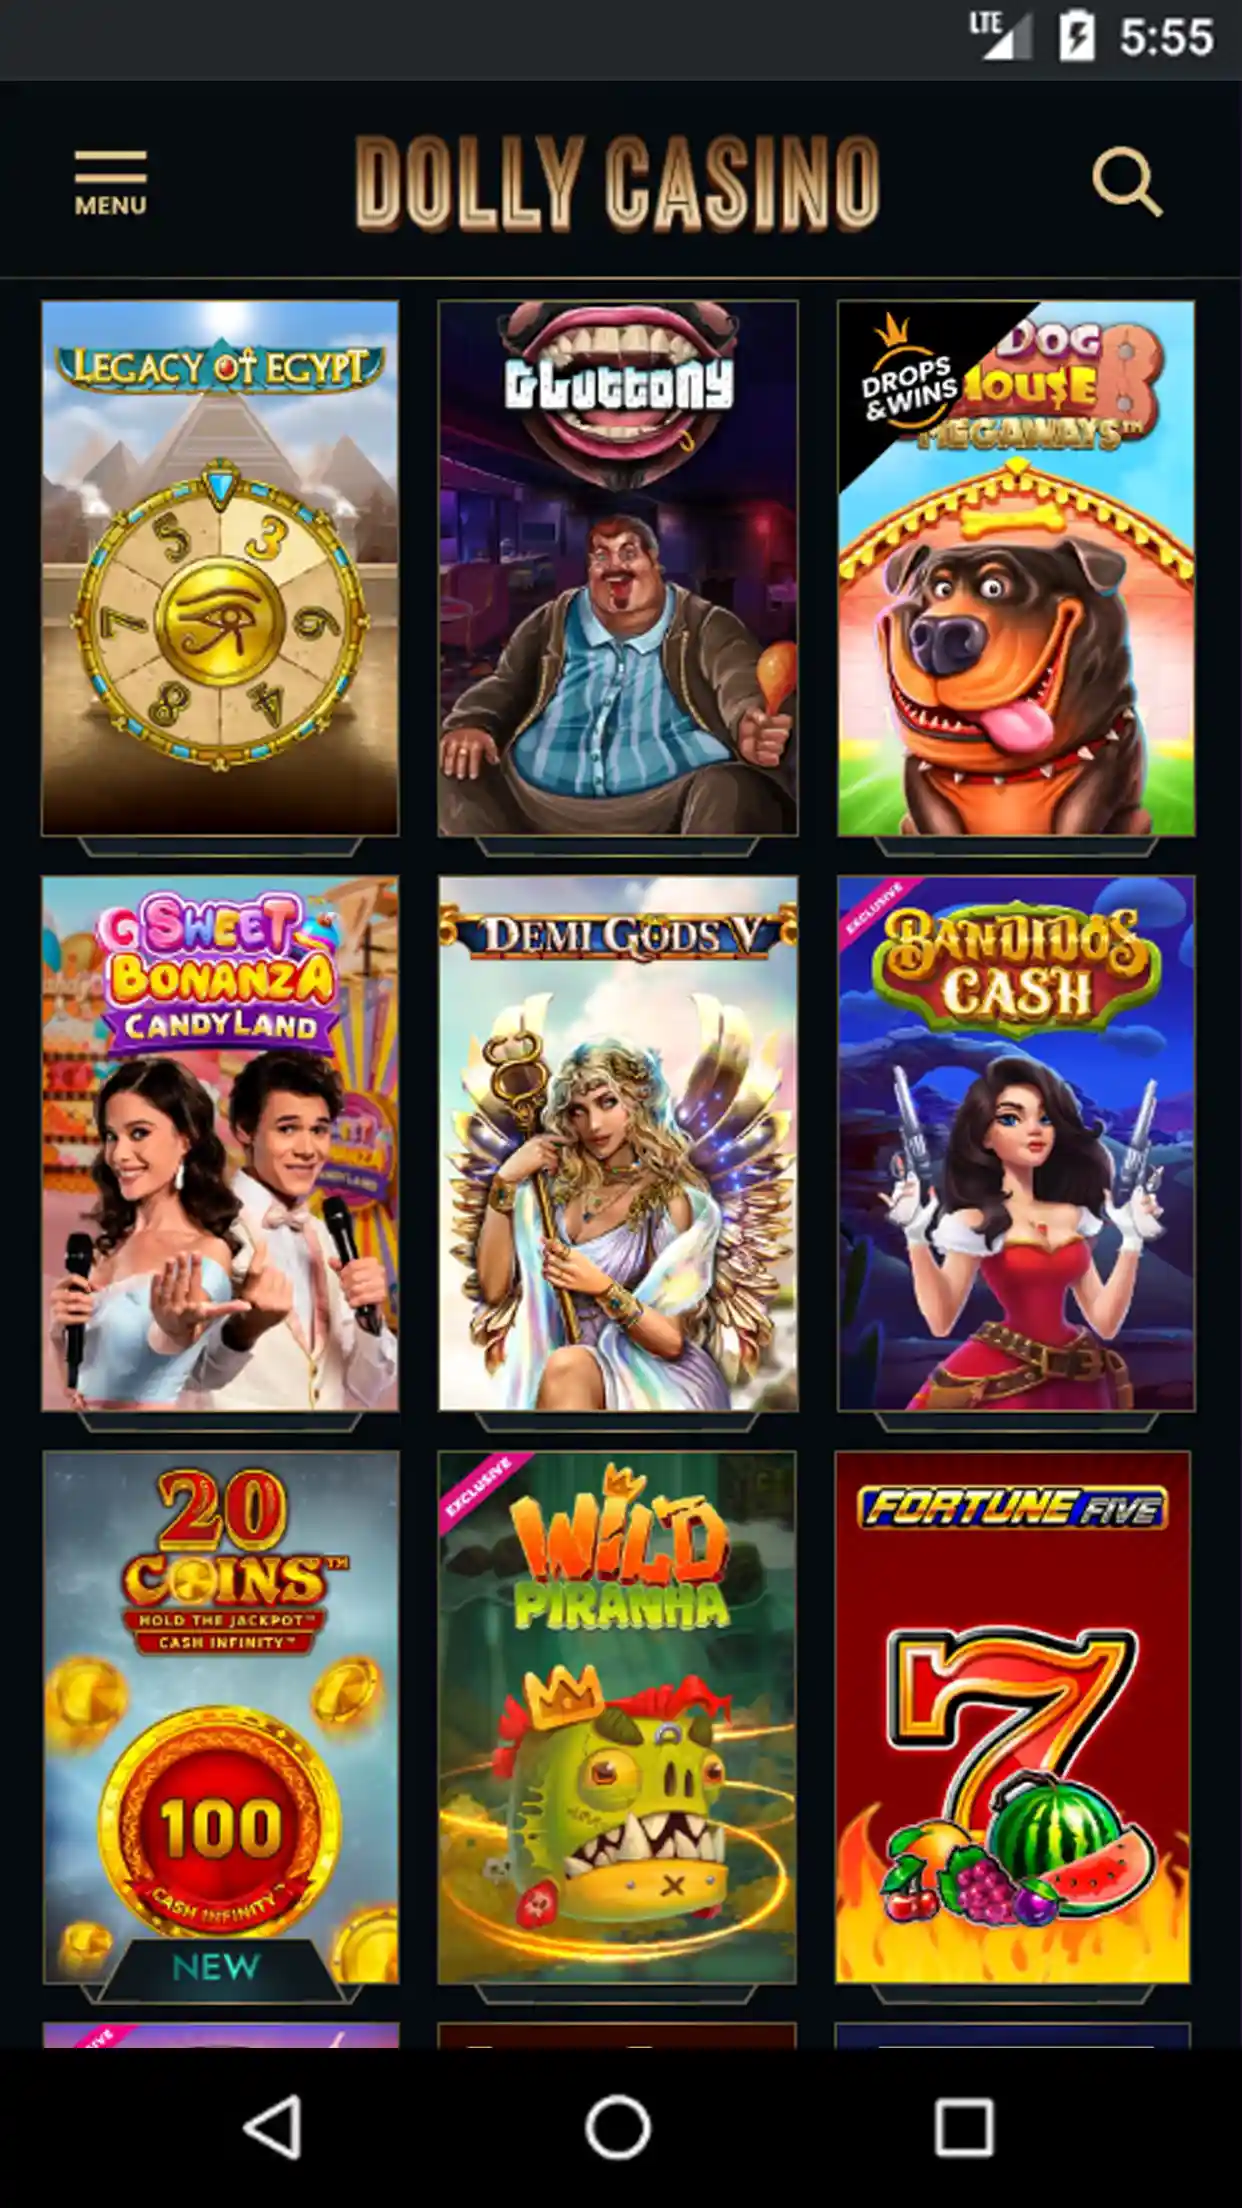 Start playing Dolly Casino on your phone.